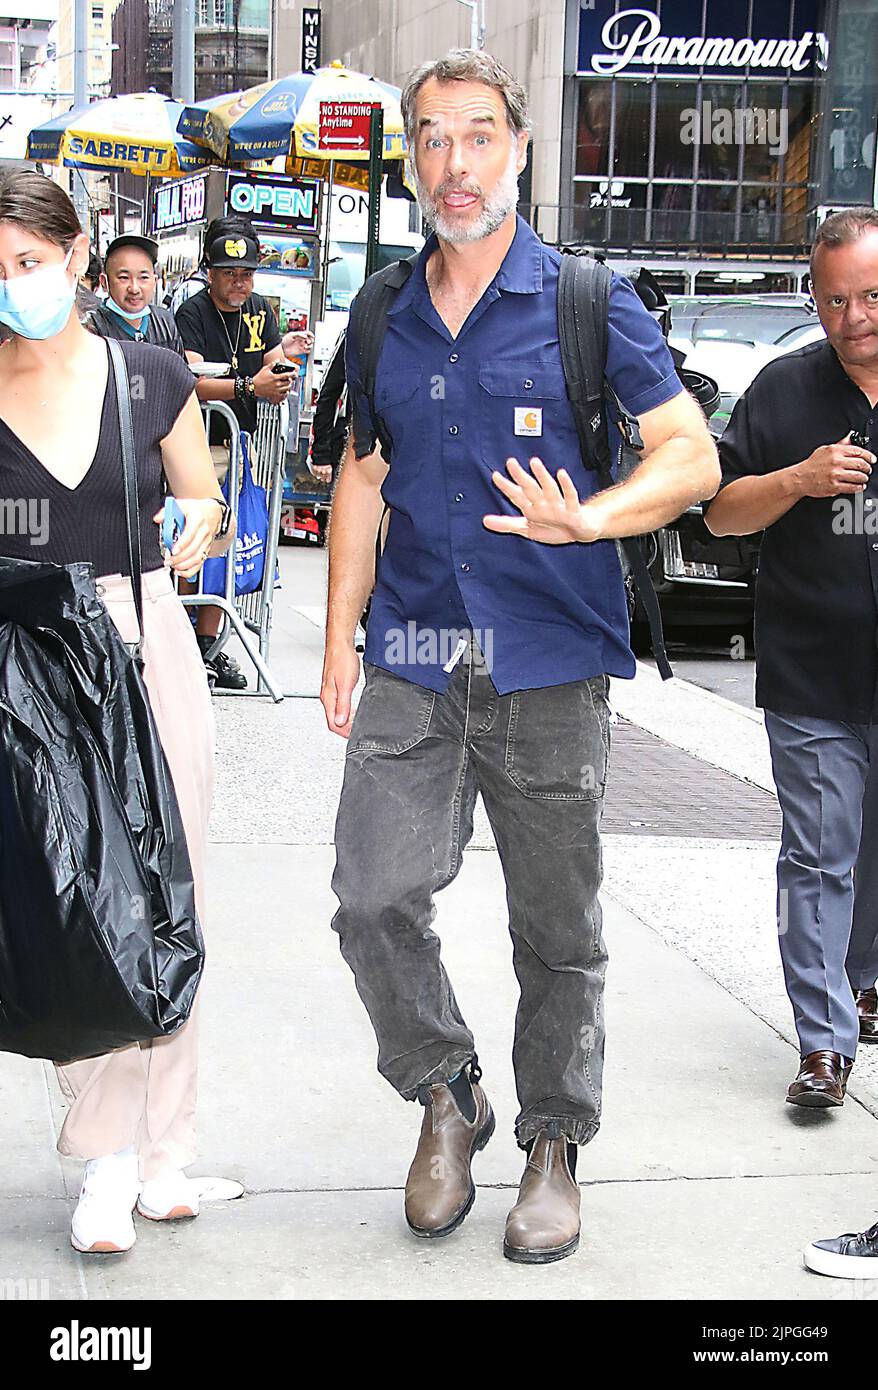 New York, NY, USA. 17. August 2022. Murray Bartlett gesehen bei Good Morning America in New York City am 17. August 2022. Quelle: Rw/Media Punch/Alamy Live News Stockfoto